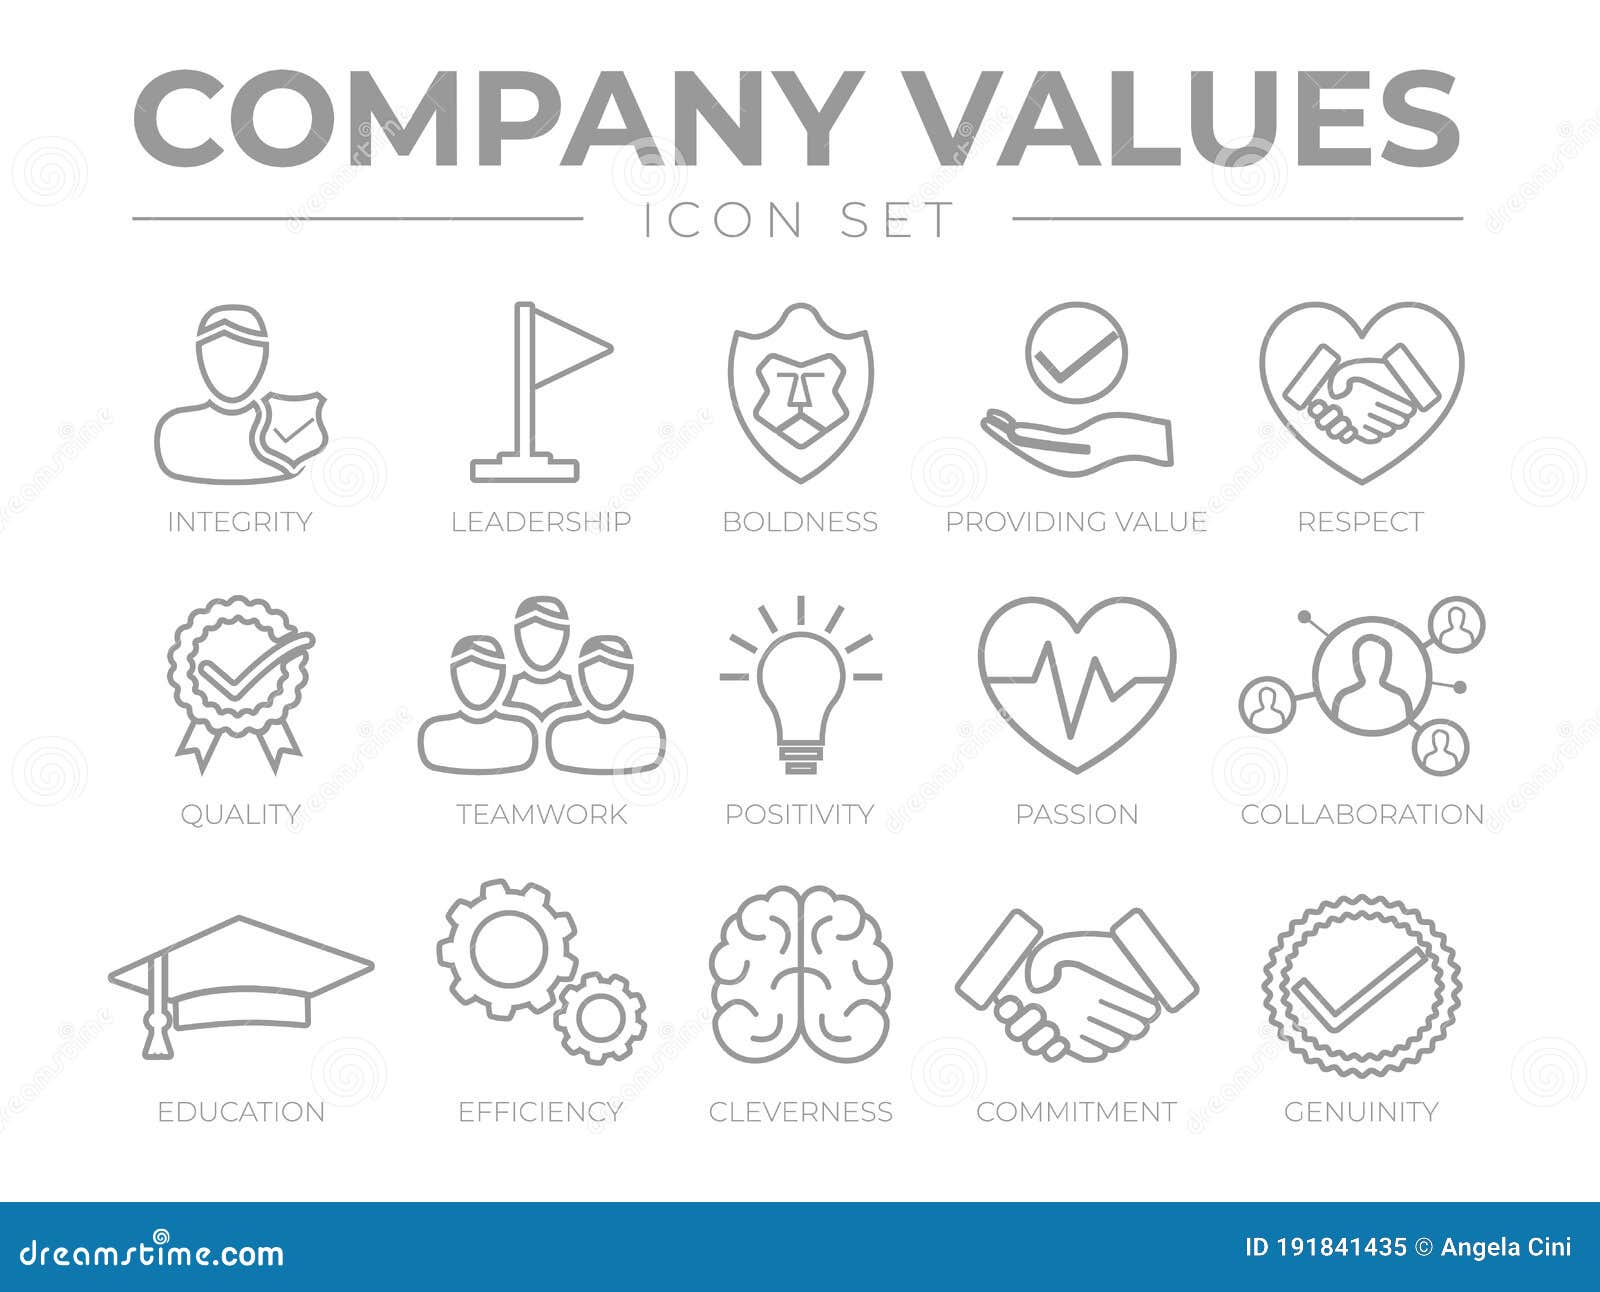 business company values outline icon set. integrity, leadership, boldness, value, respect, quality, teamwork, positivity, passion